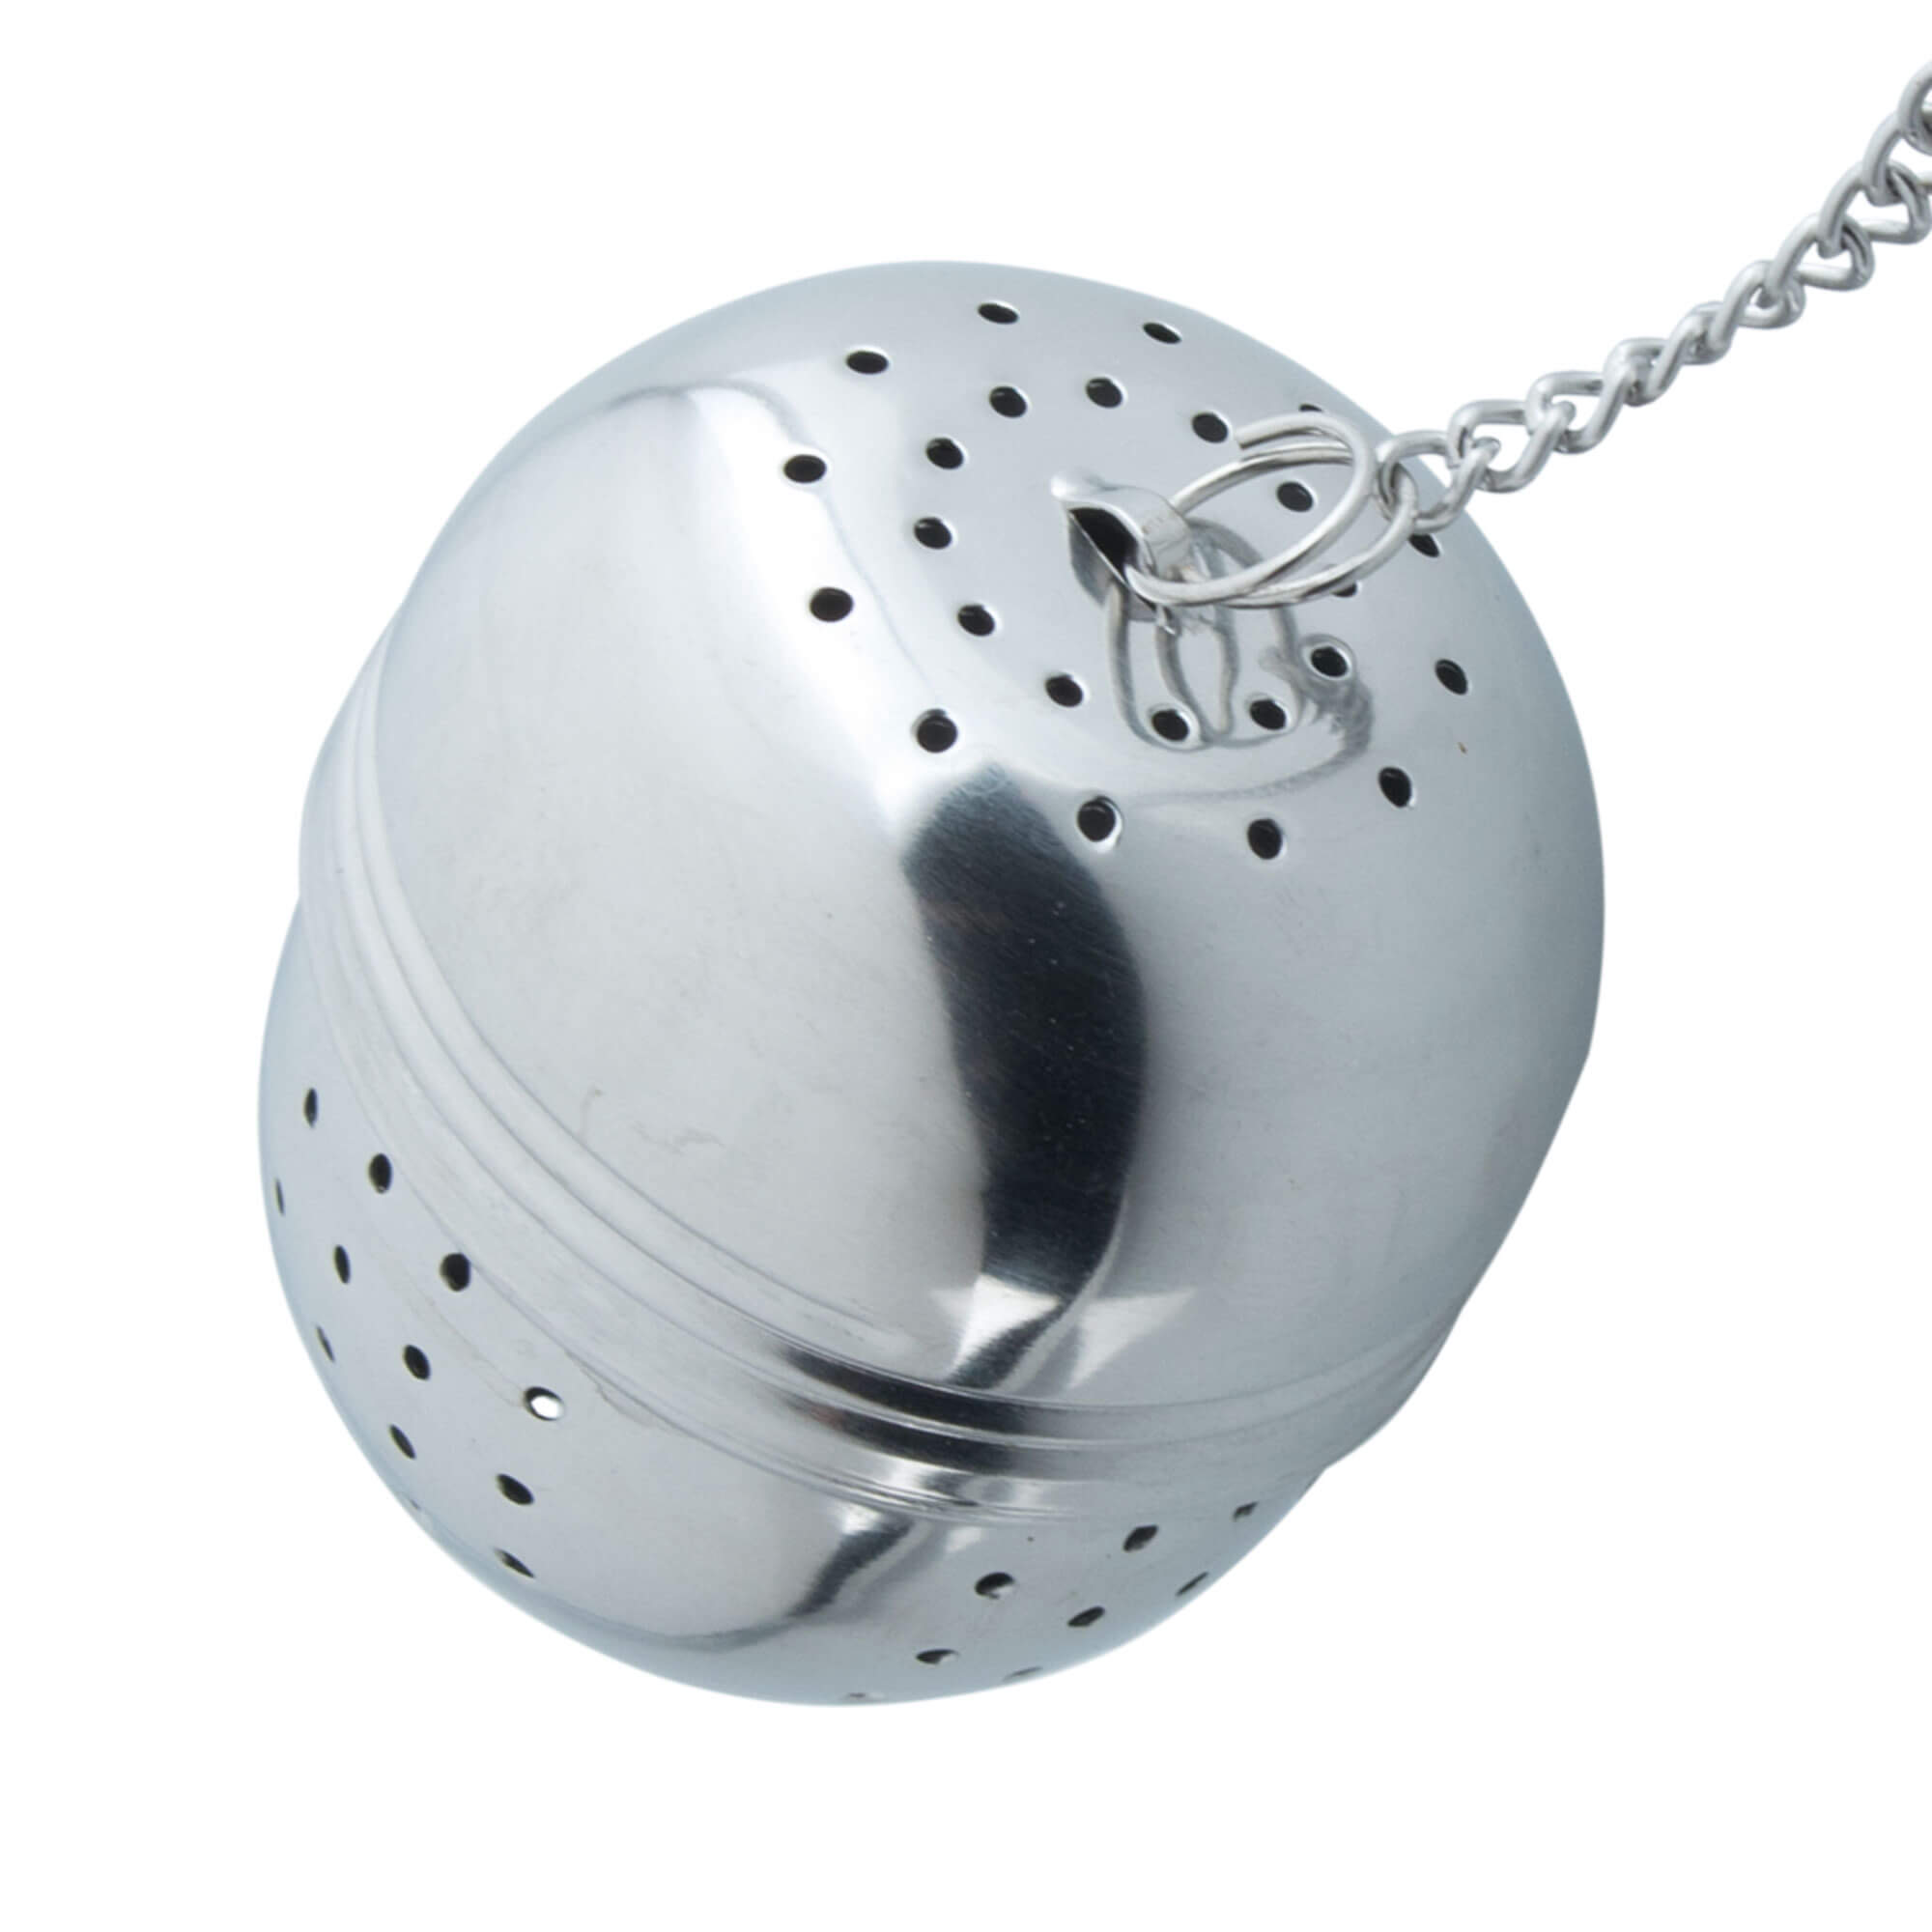 Tea infuser with chain, stainless steel - 4cm